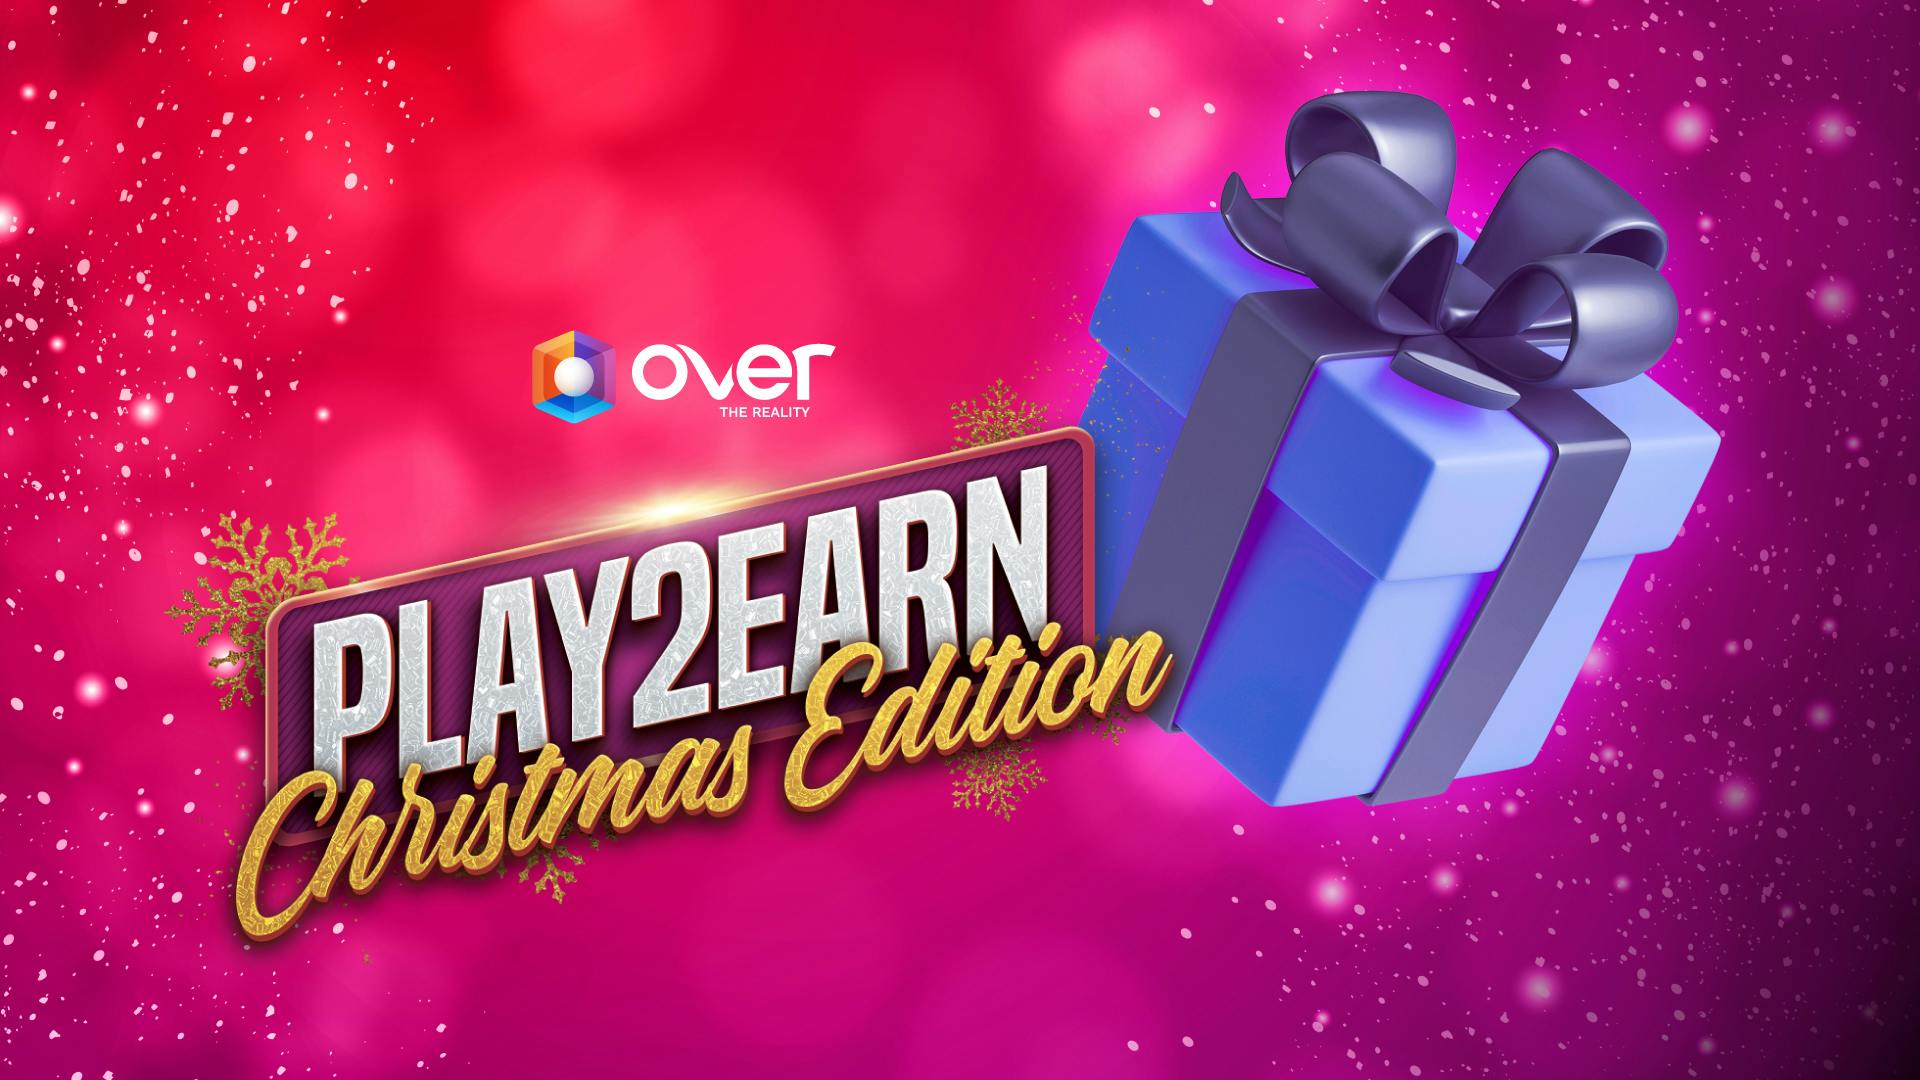 Xmas Play2Earn: Over the Reality dresses up for the festive season